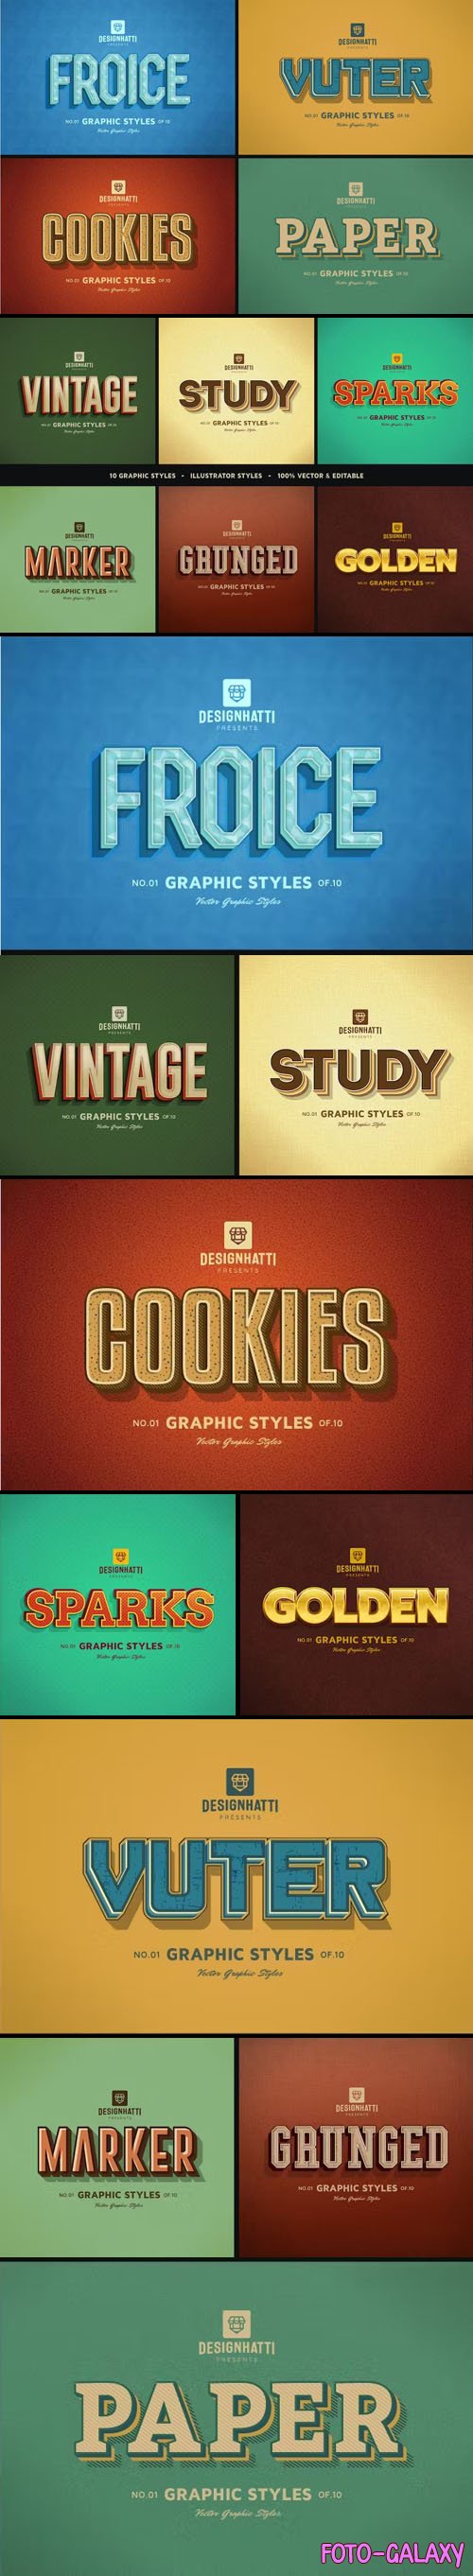 Retro Vintage Text Effects [Vol.2] 10+ Styles for Illustrator